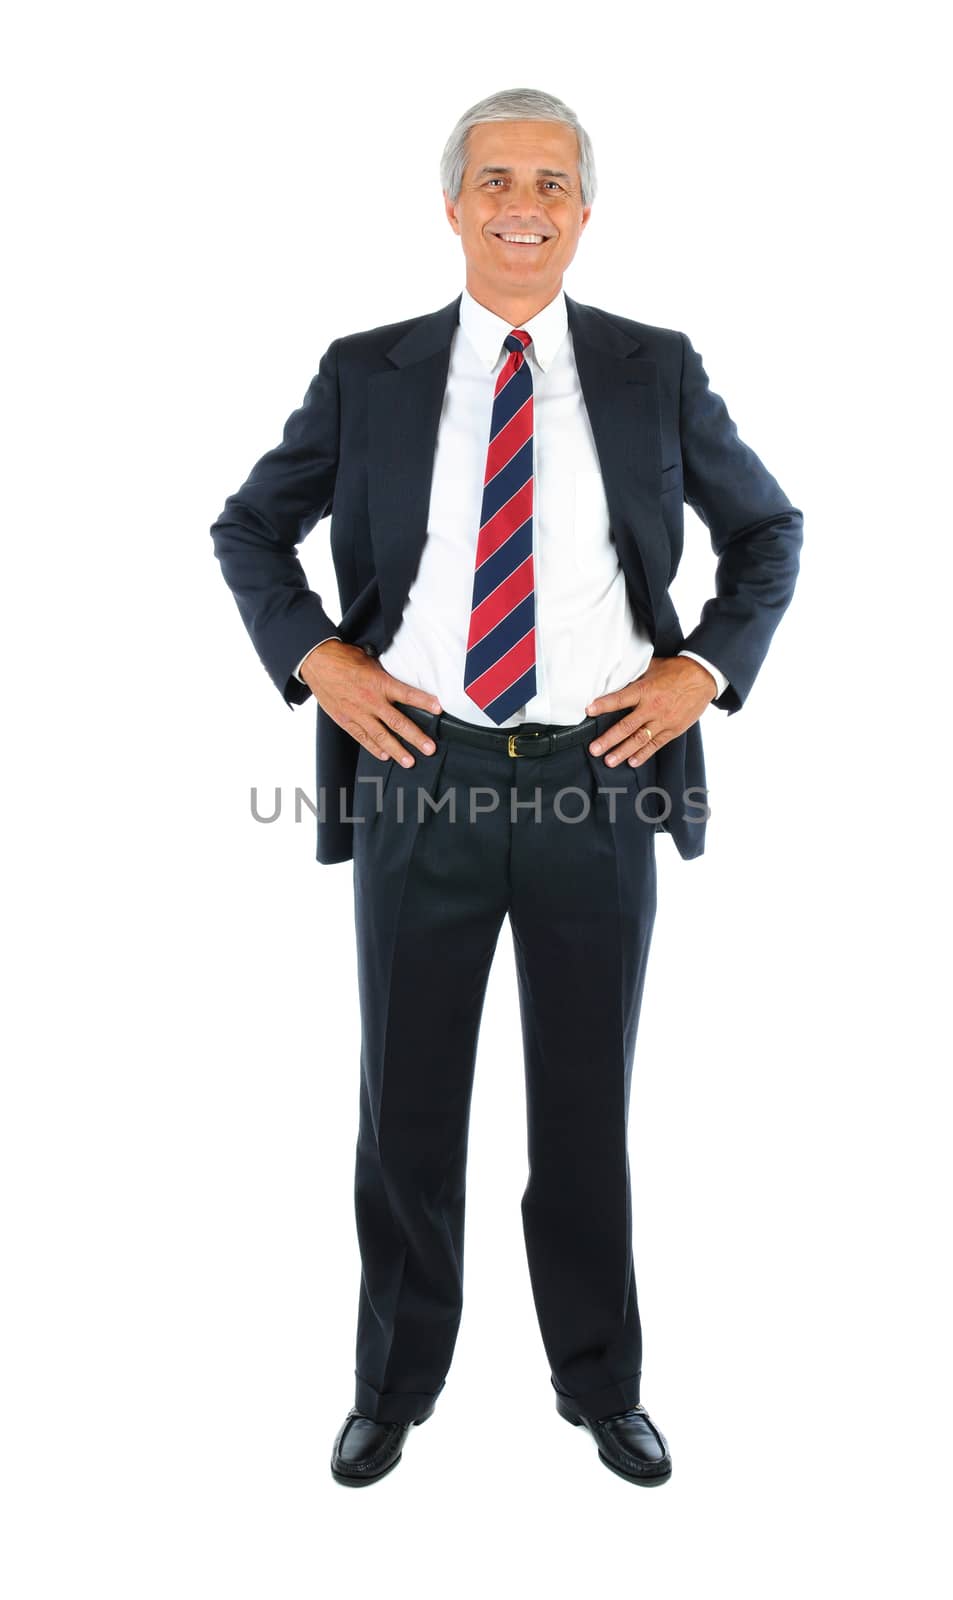 Smiling middle aged businessman in a suit and tie with his hands on hips. Full length over a white background.